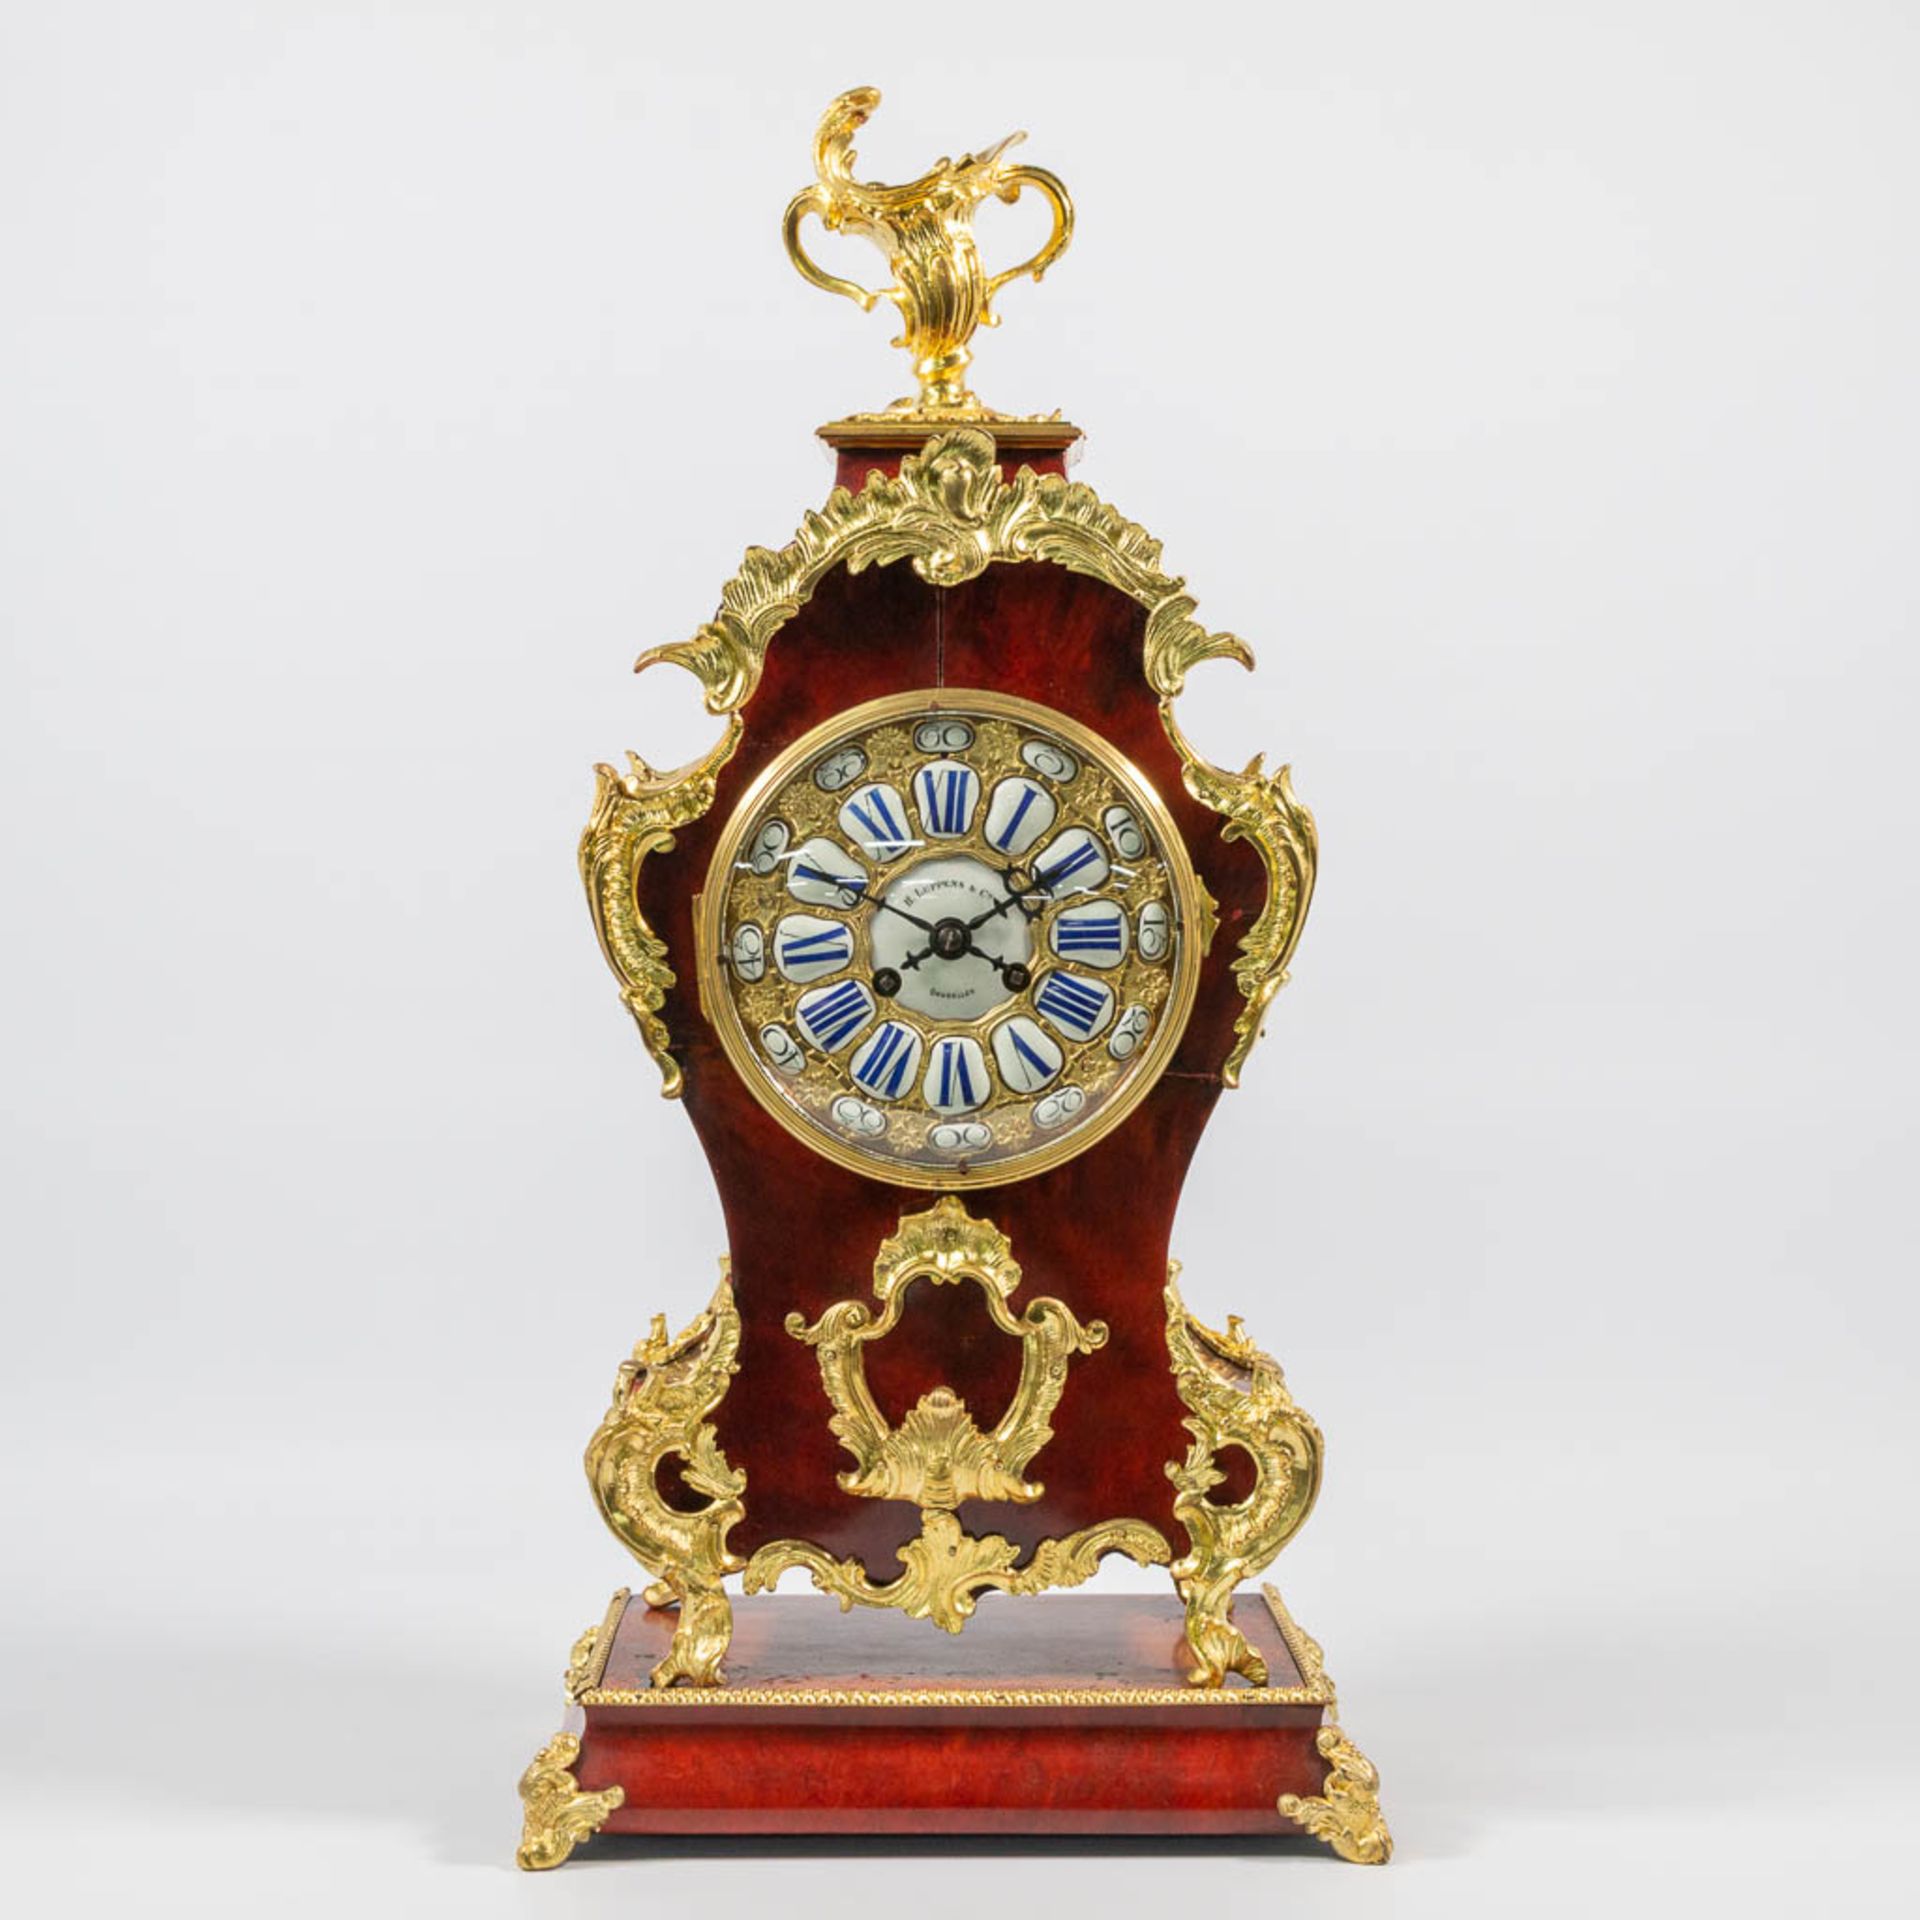 Table clock made of wood decorated with Tortoise shell